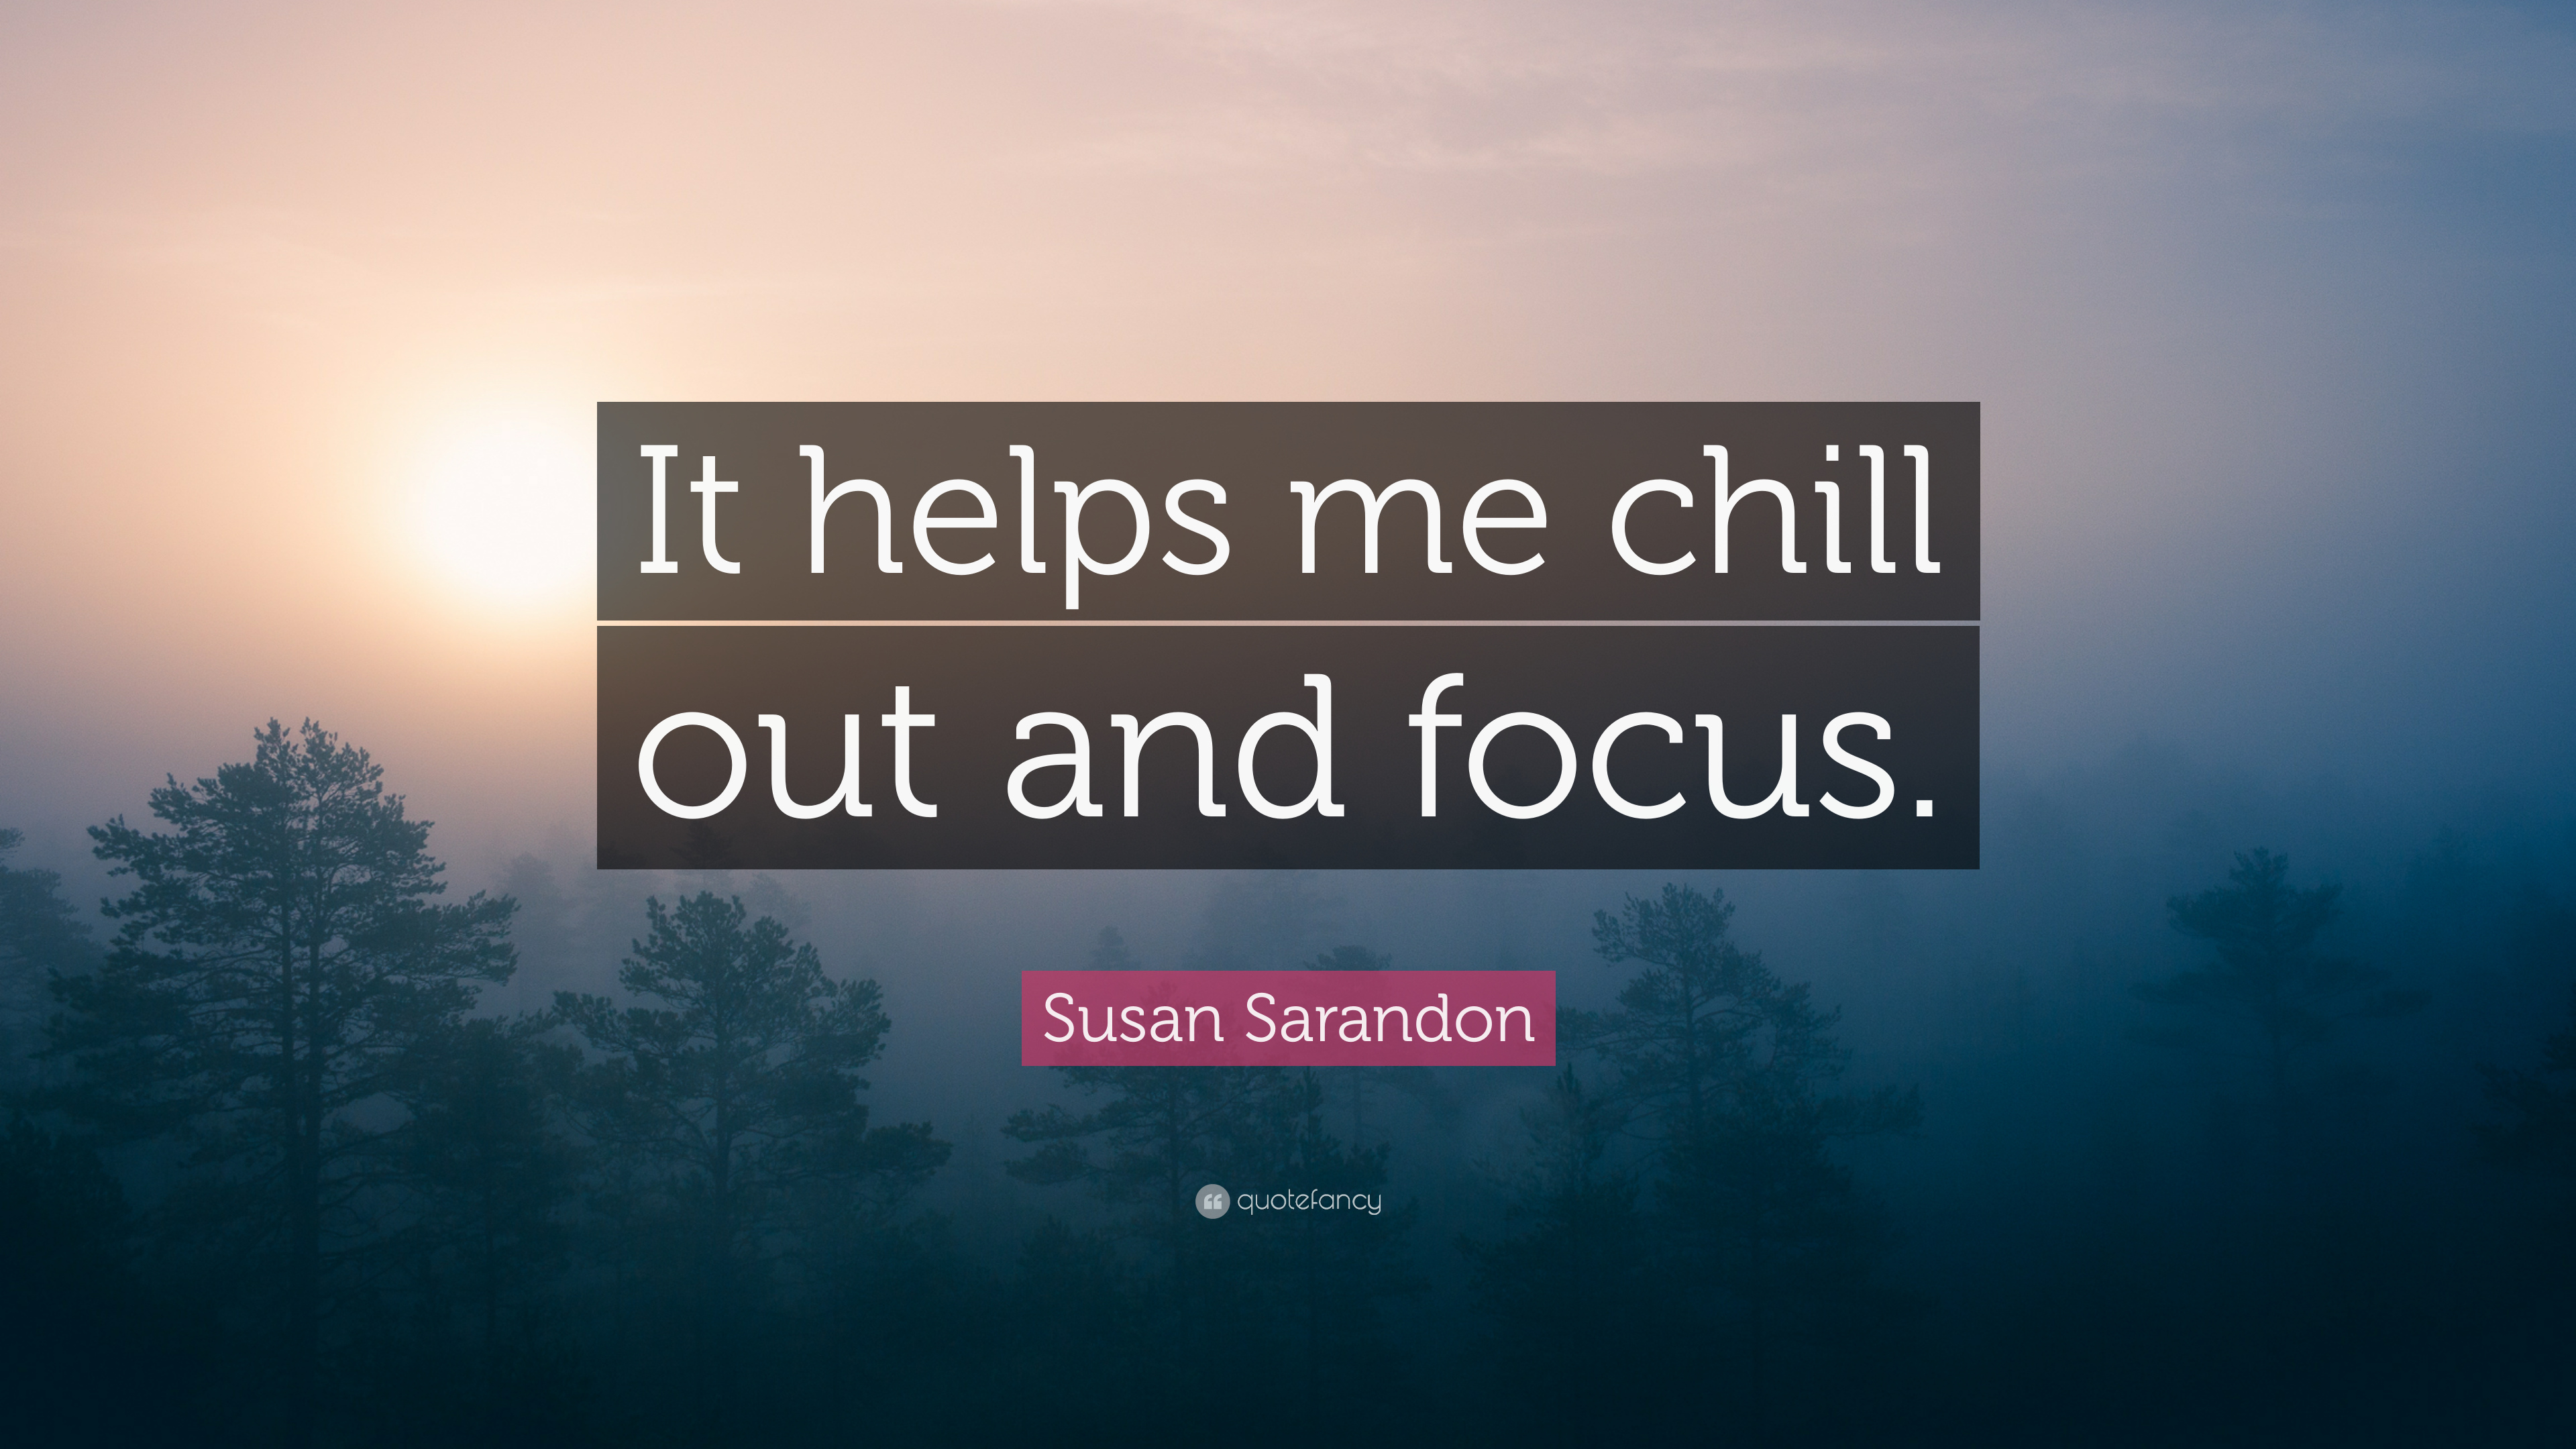 Susan Sarandon Quote: “It helps me chill out and focus.” 7